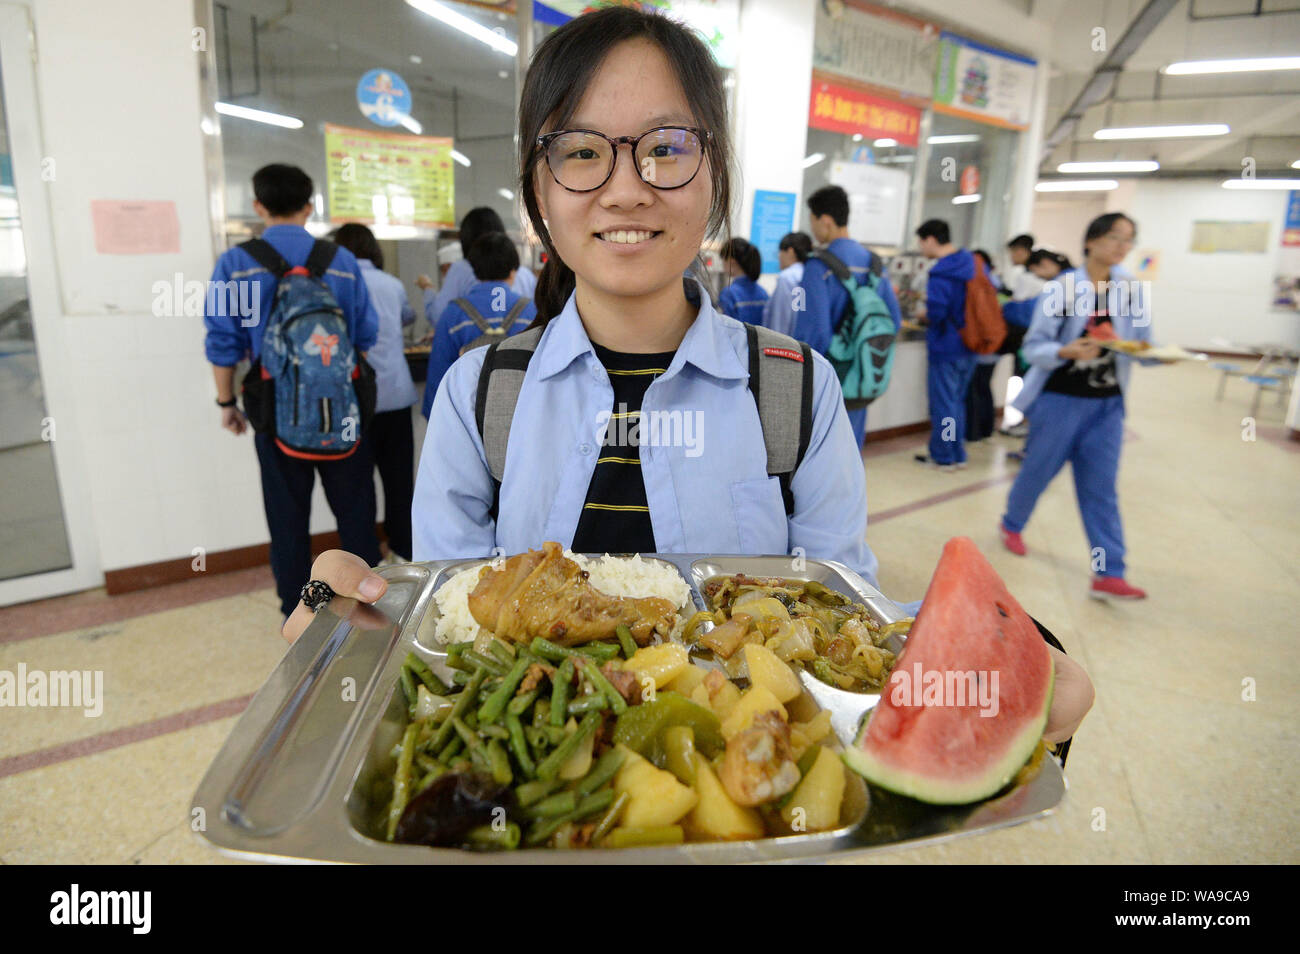 Food Waste In Canteen In China